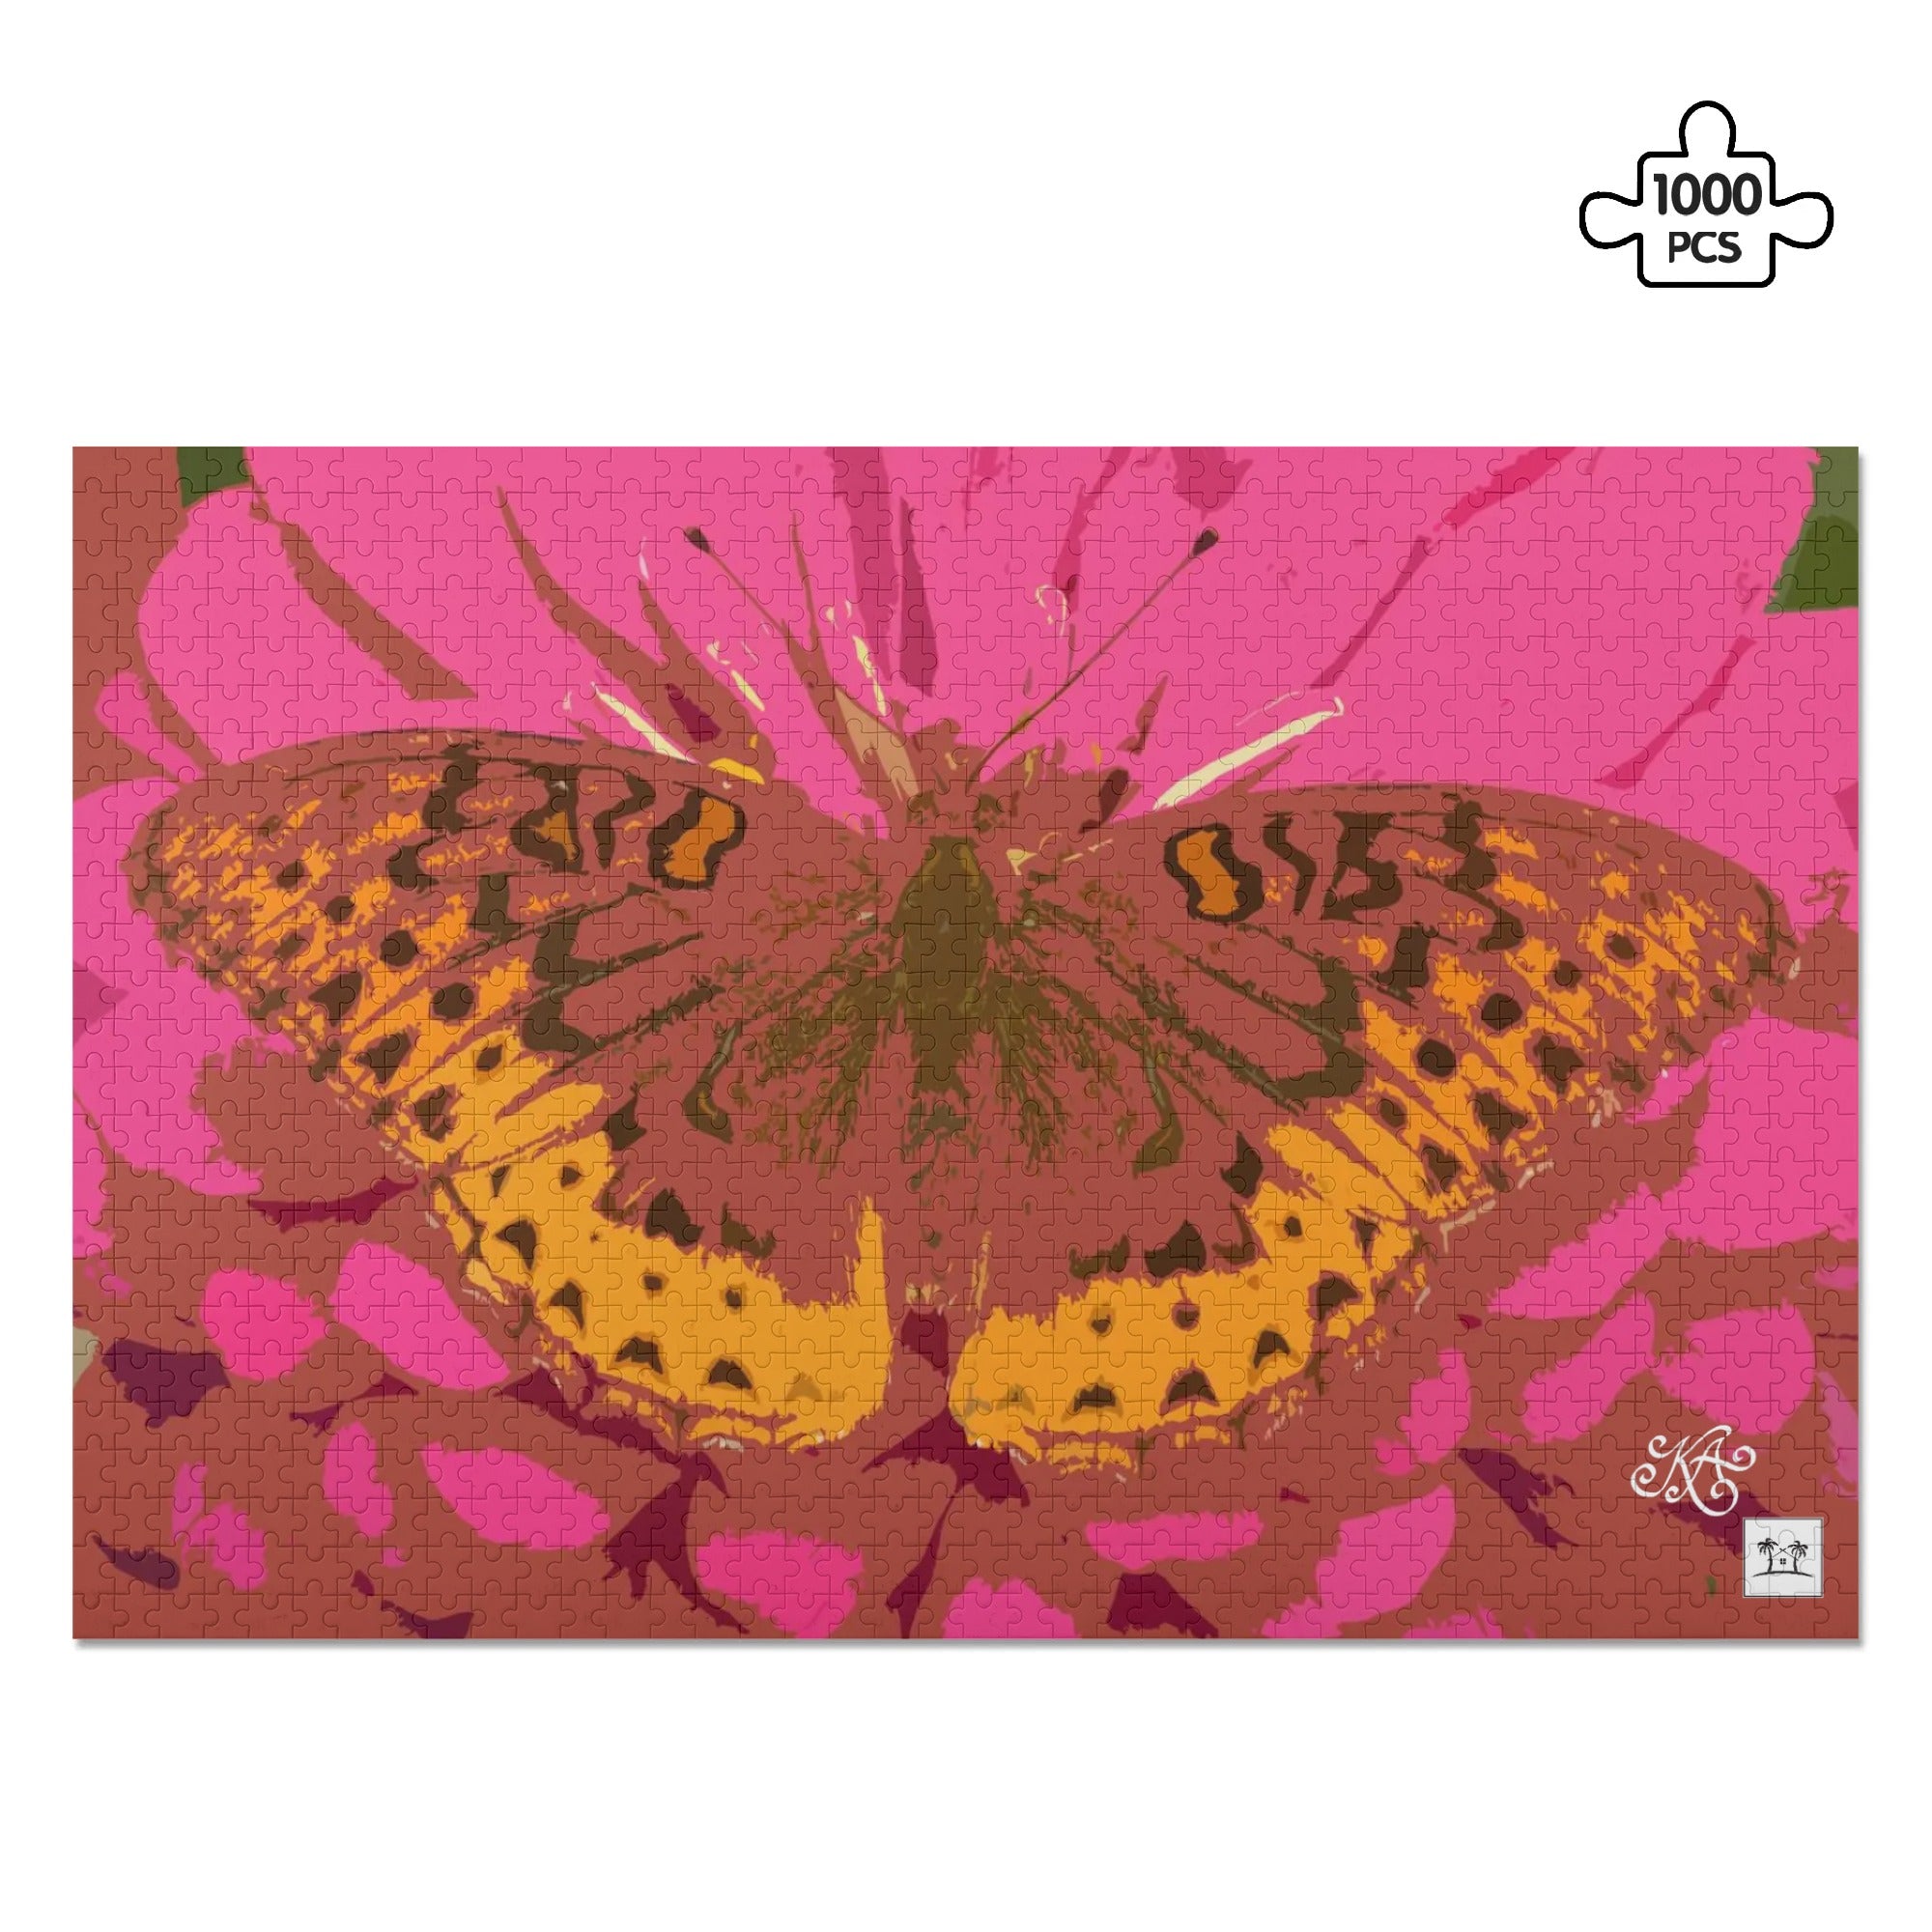 Wooden Jigsaw Puzzle (1000 Pcs) - Painted Lady